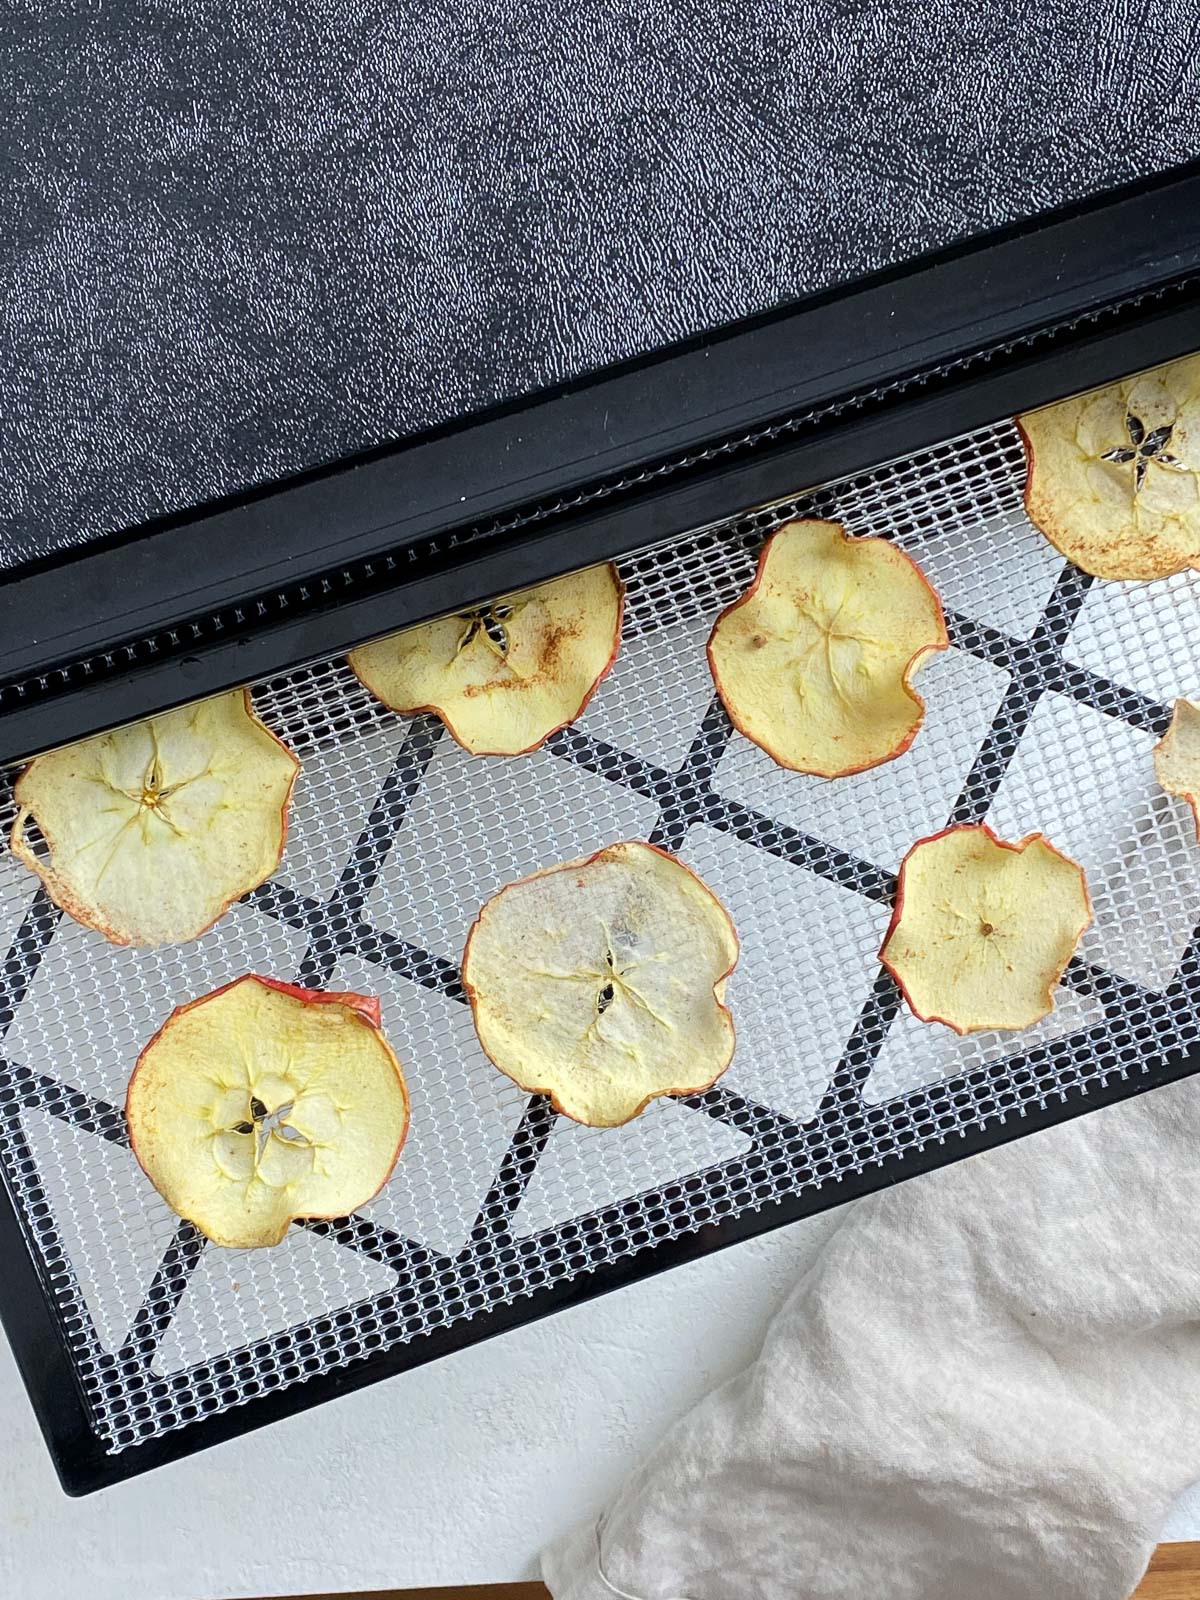 completed apple chips on top of dehydrator tray